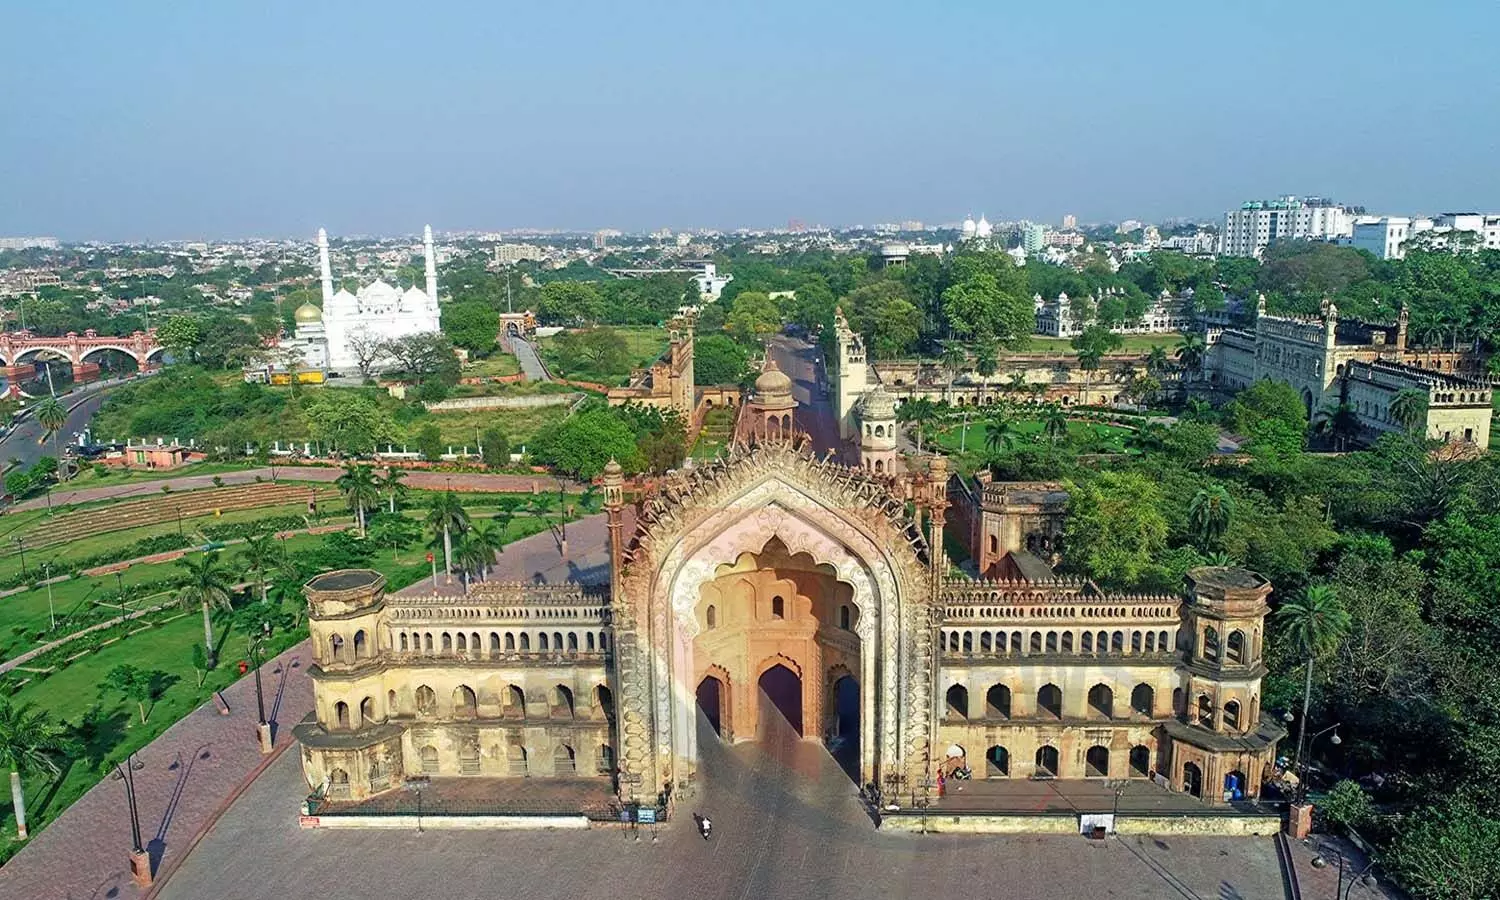 Year of Hope: 2022- Rumi Darwaza located in Lucknow, the capital of UP